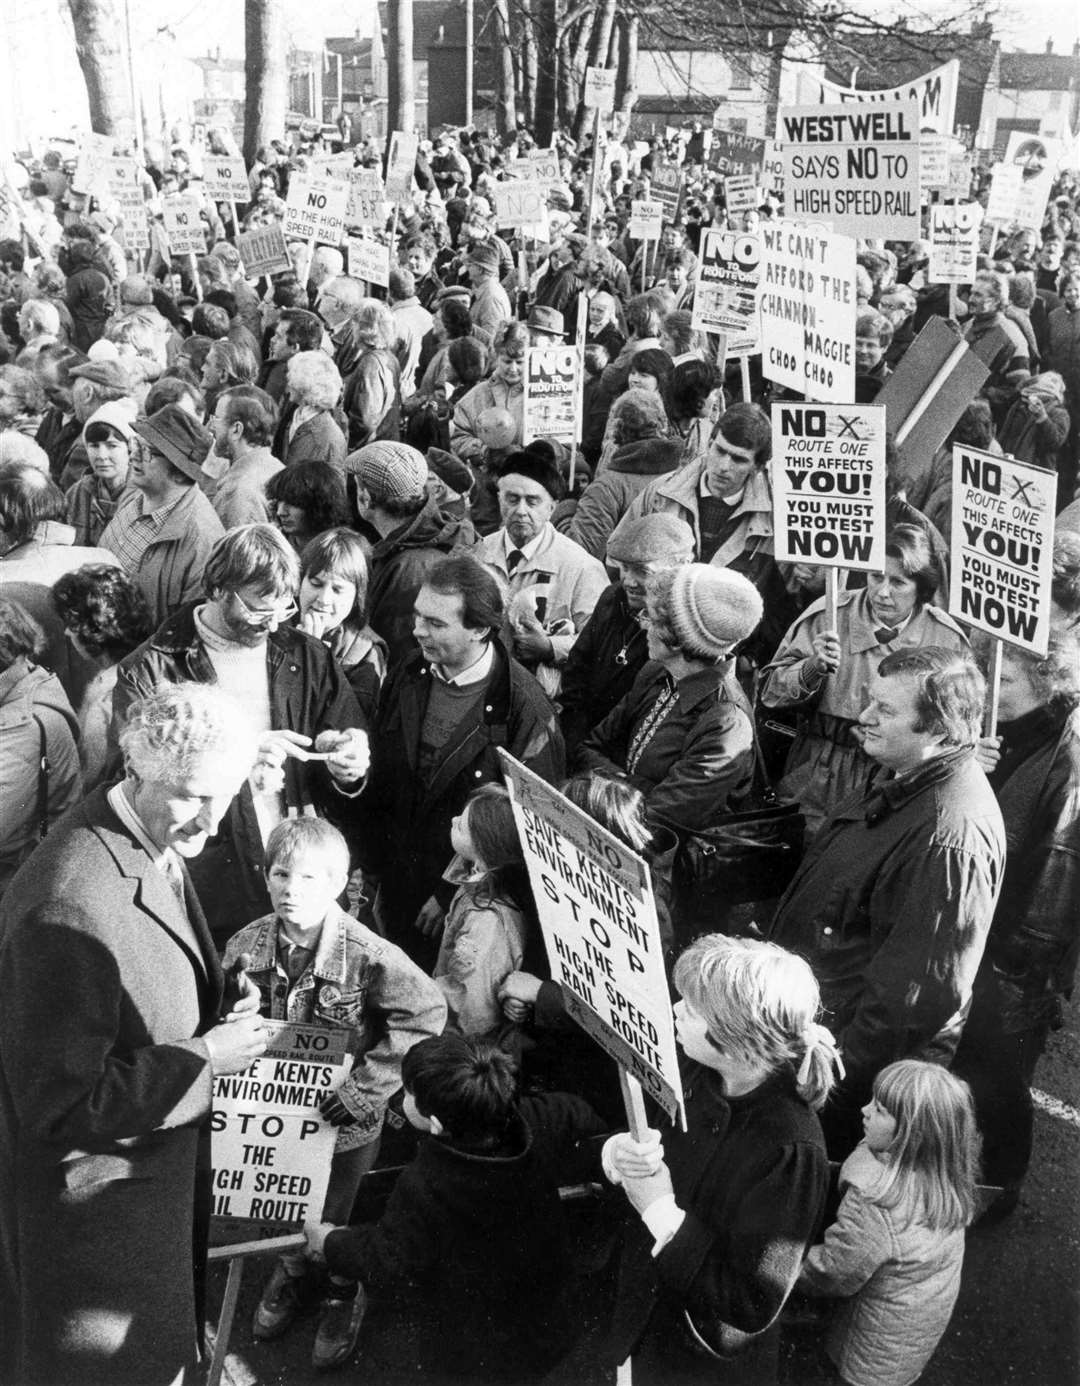 Thousands of protesters took to the streets and staged rallies in what was an unprecedented display of people power against what would become the Eurostar rail link. This rally was outside County Hall in Maidstone in March, 1989. A huge sound system played the noise of a French high speed train to demonstrate what it would be like to live next to the link